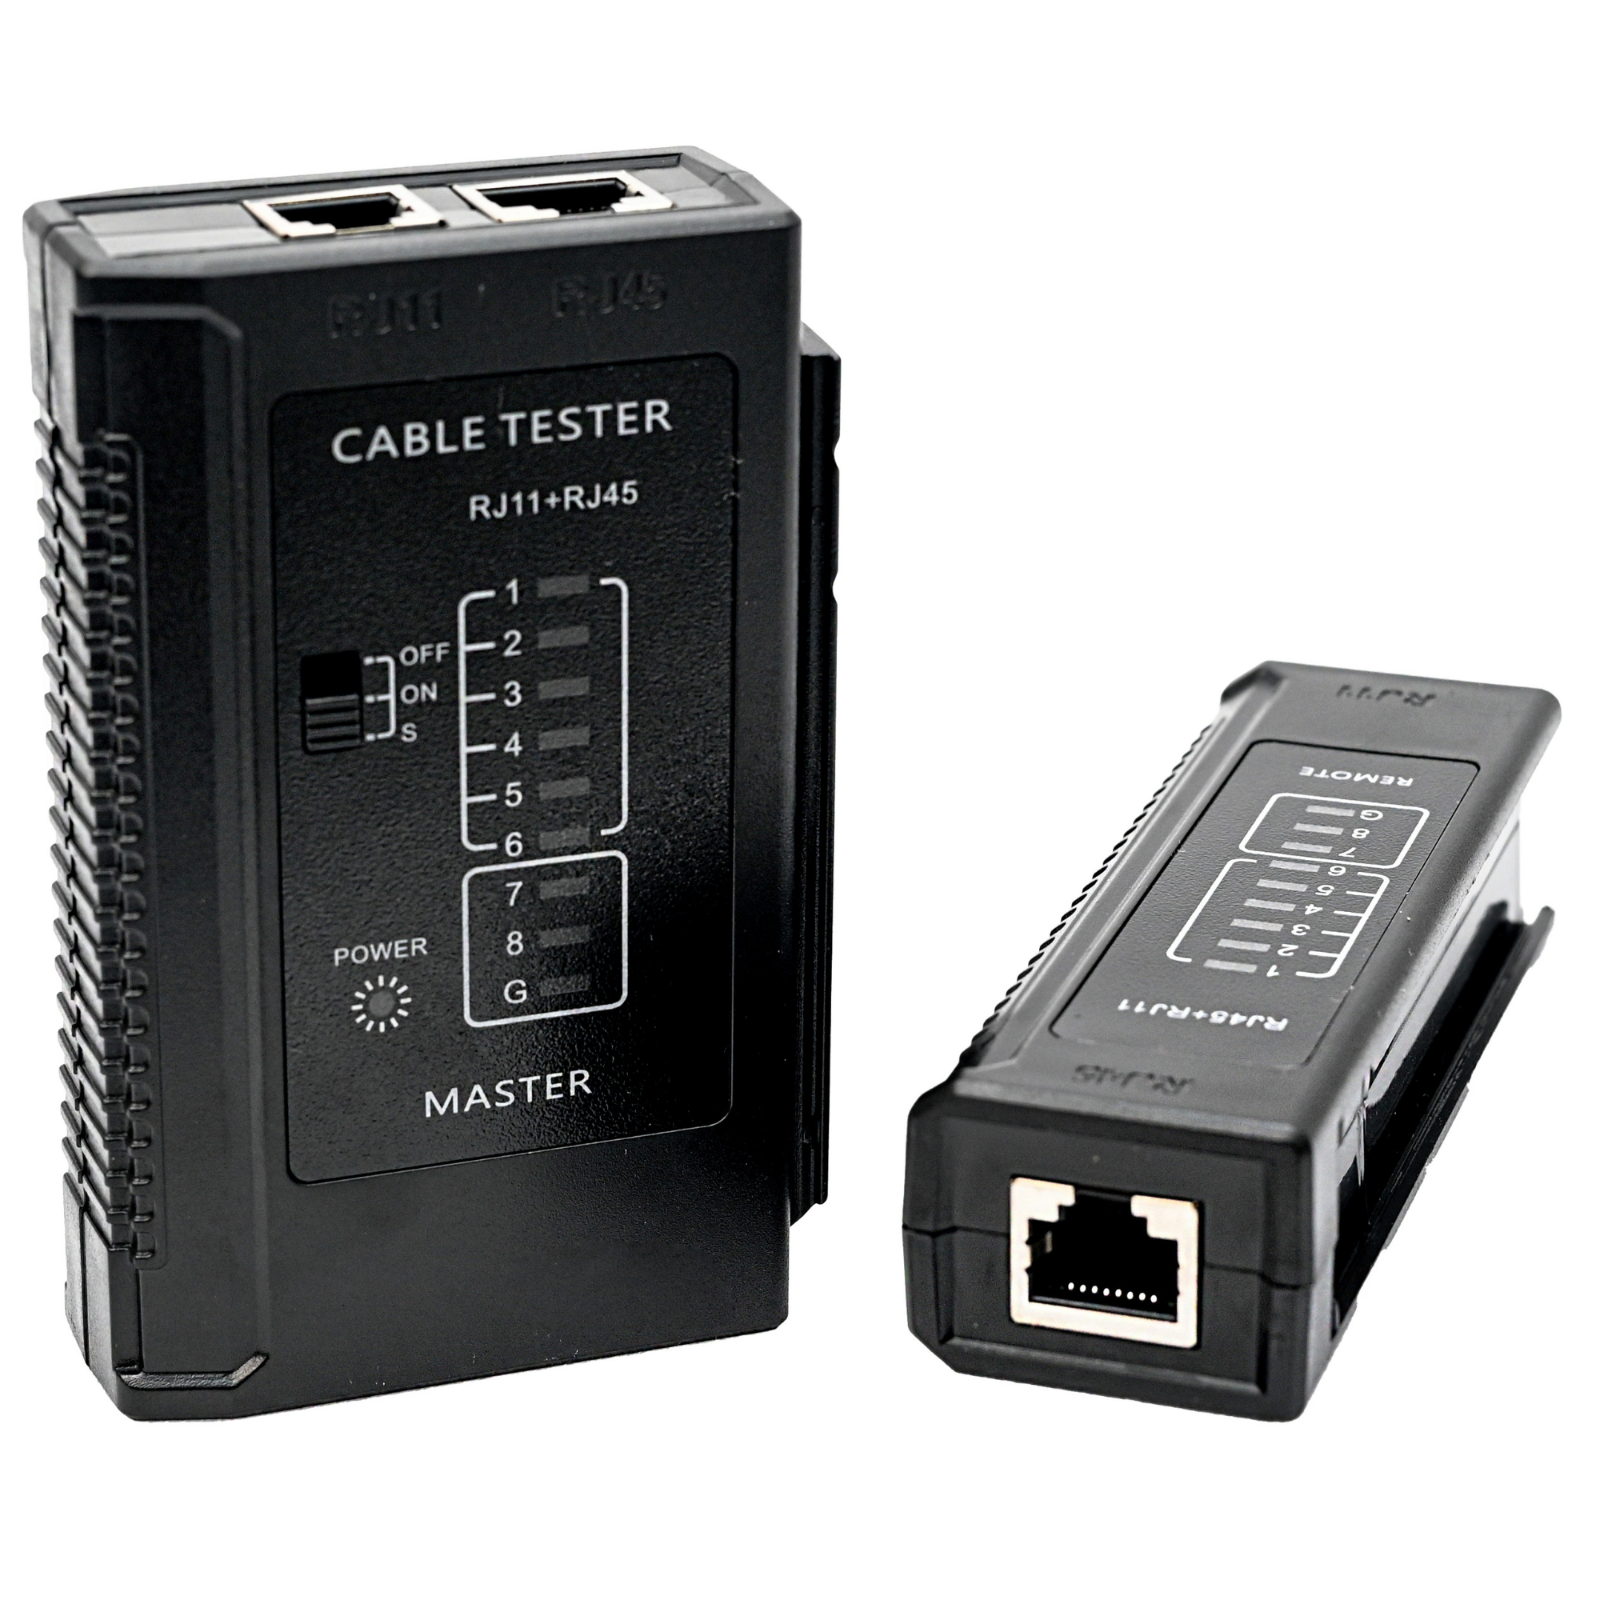 Network CABLE Tester RJ45 Ethernet Testing Test Tool Cat5 Cat5e